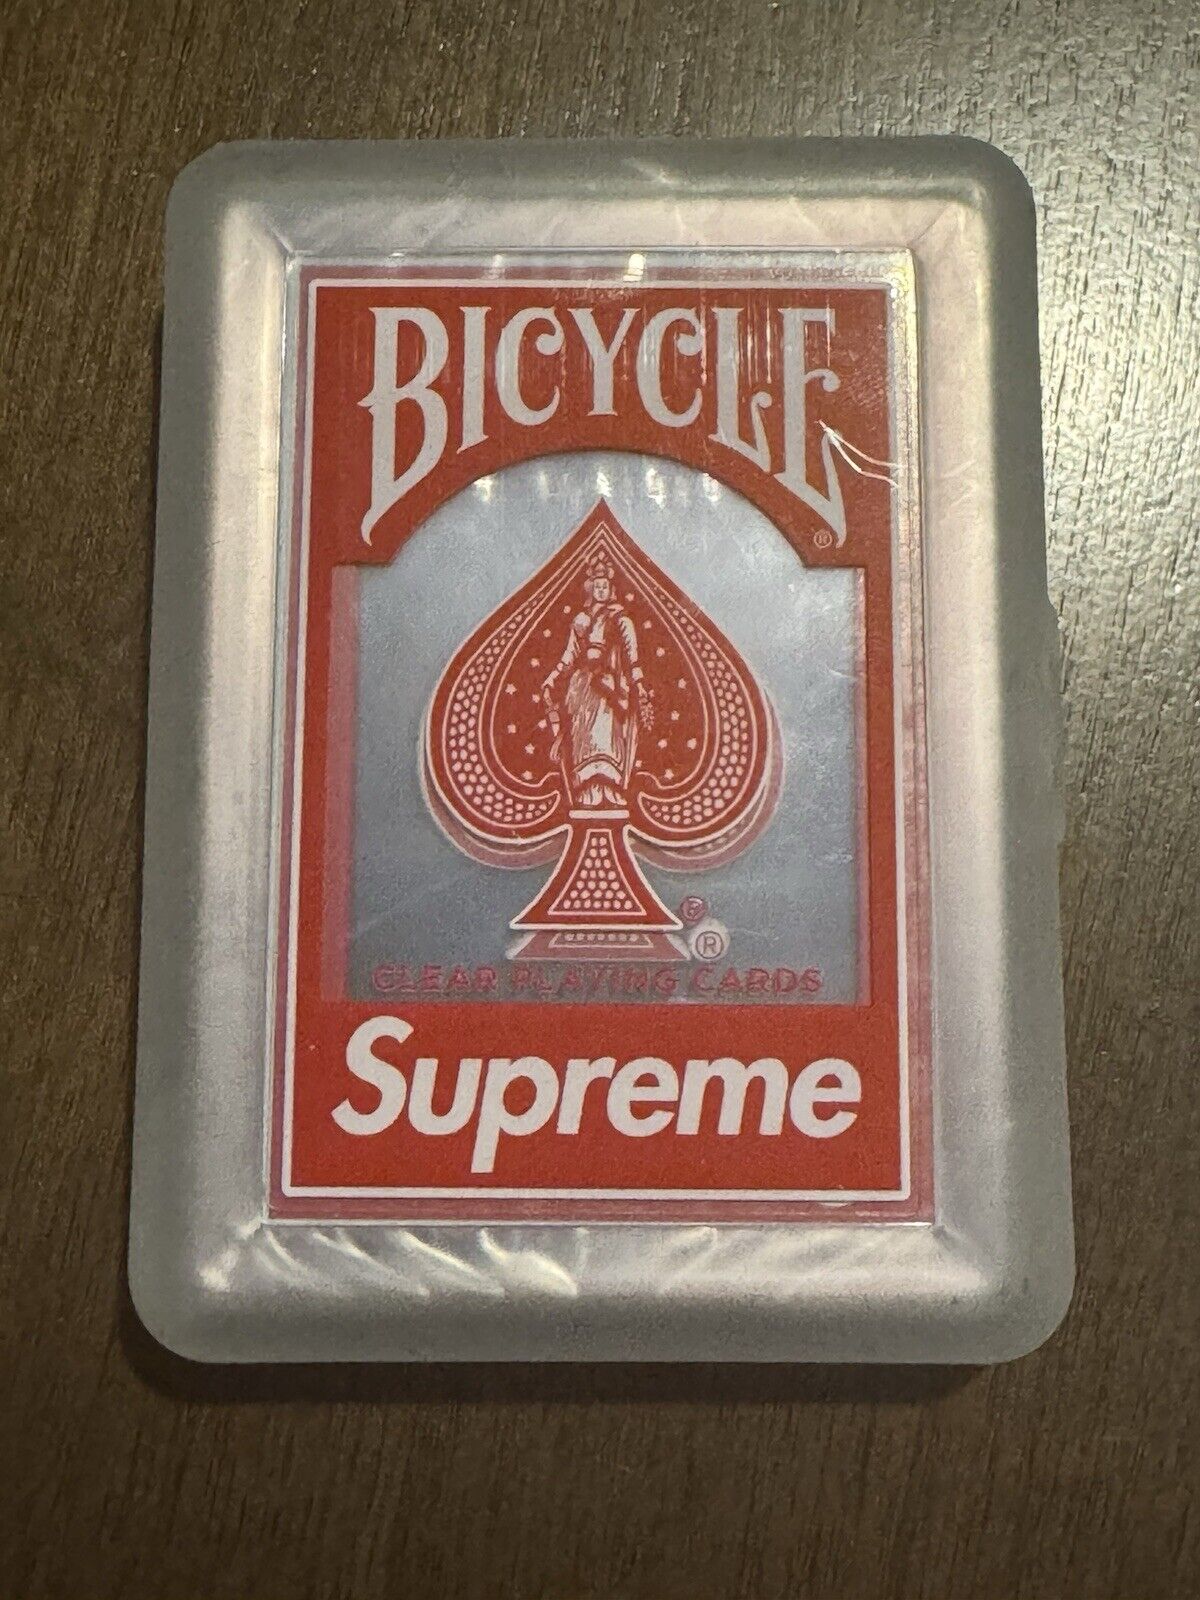 BRAND NEW SEALED Bicycle Supreme Clear Playing Cards - Red